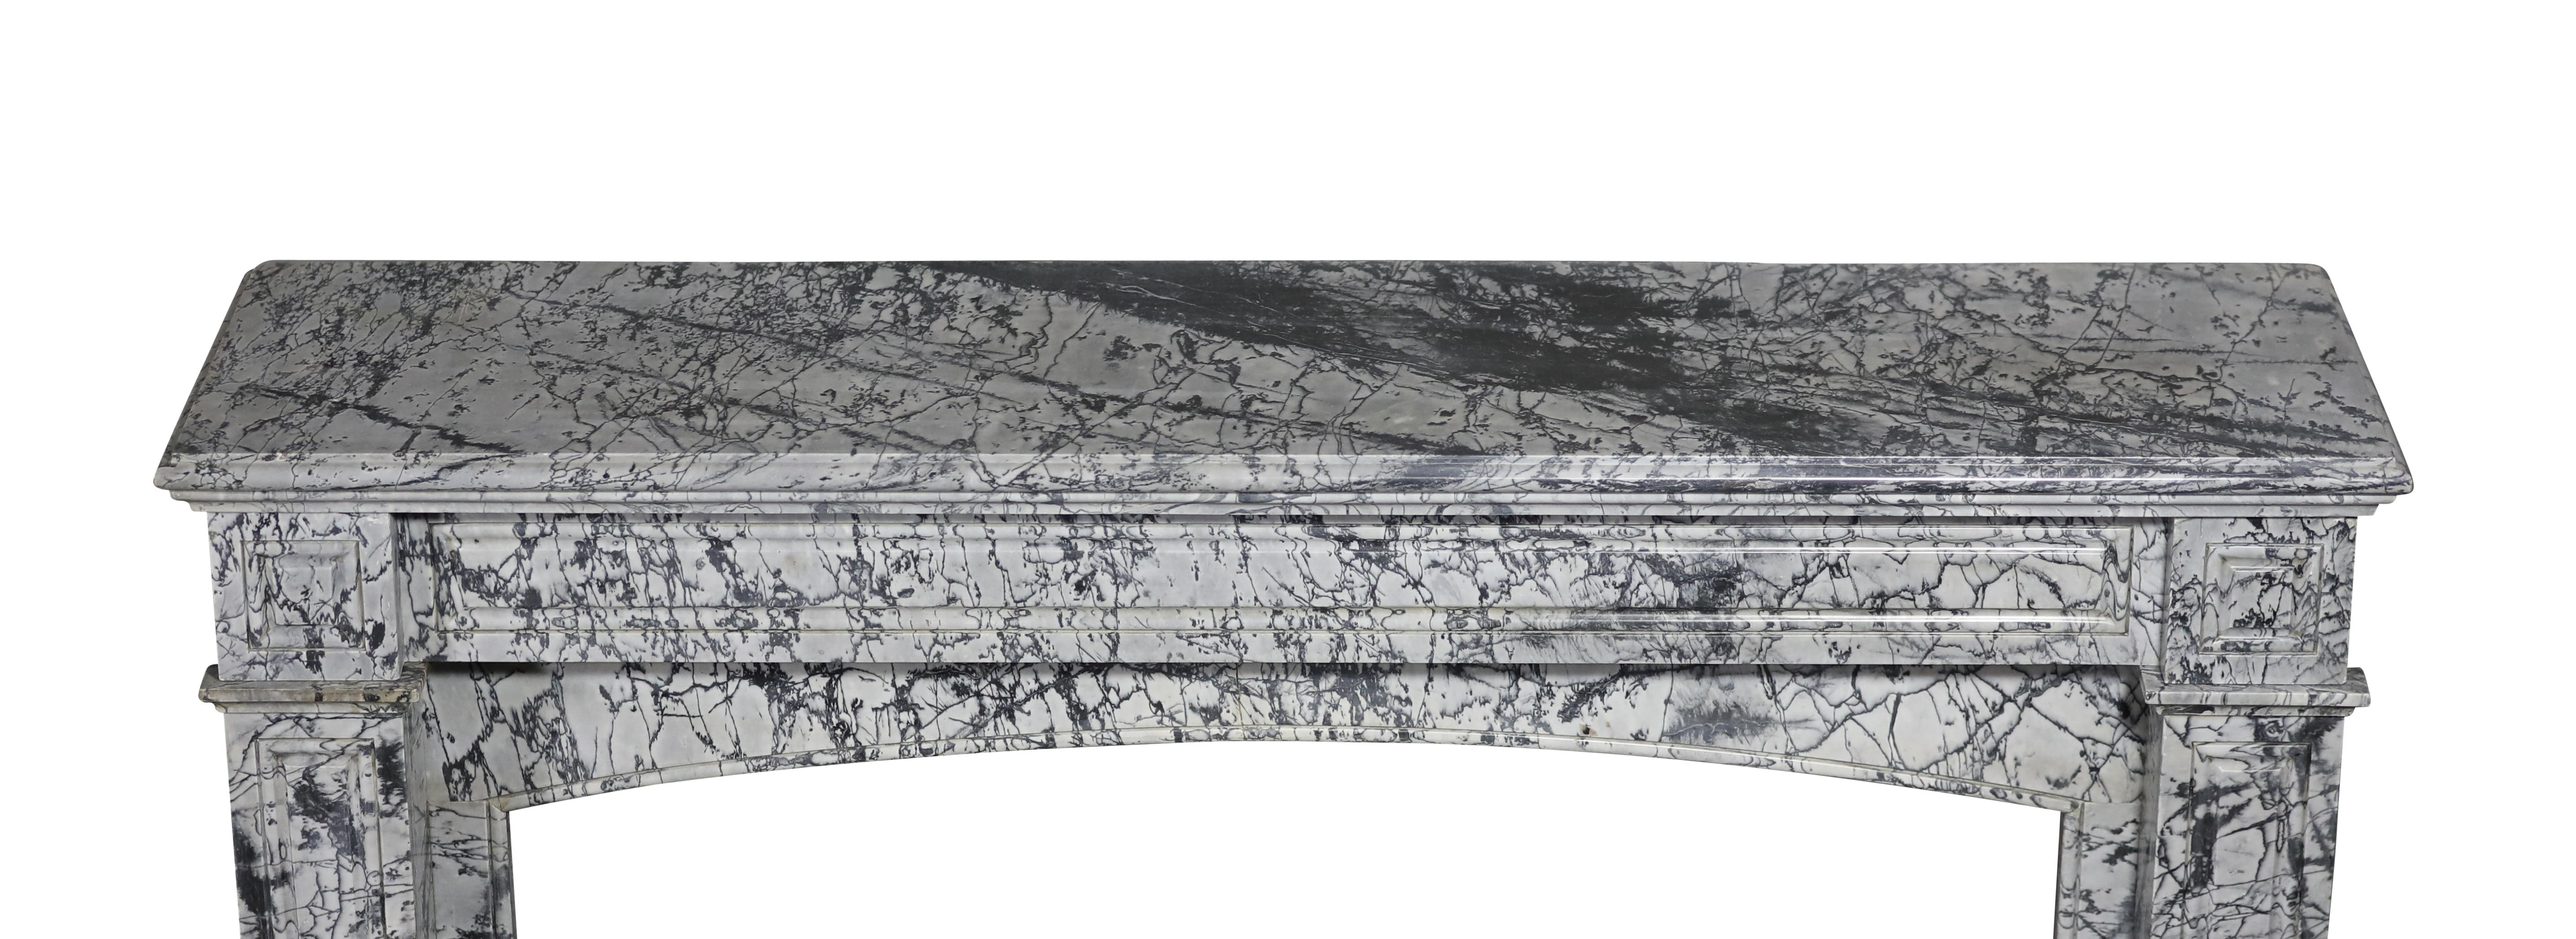 Bleu Turquin Marble Fireplace Surround In Great Condition For Timeless Design For Sale 11